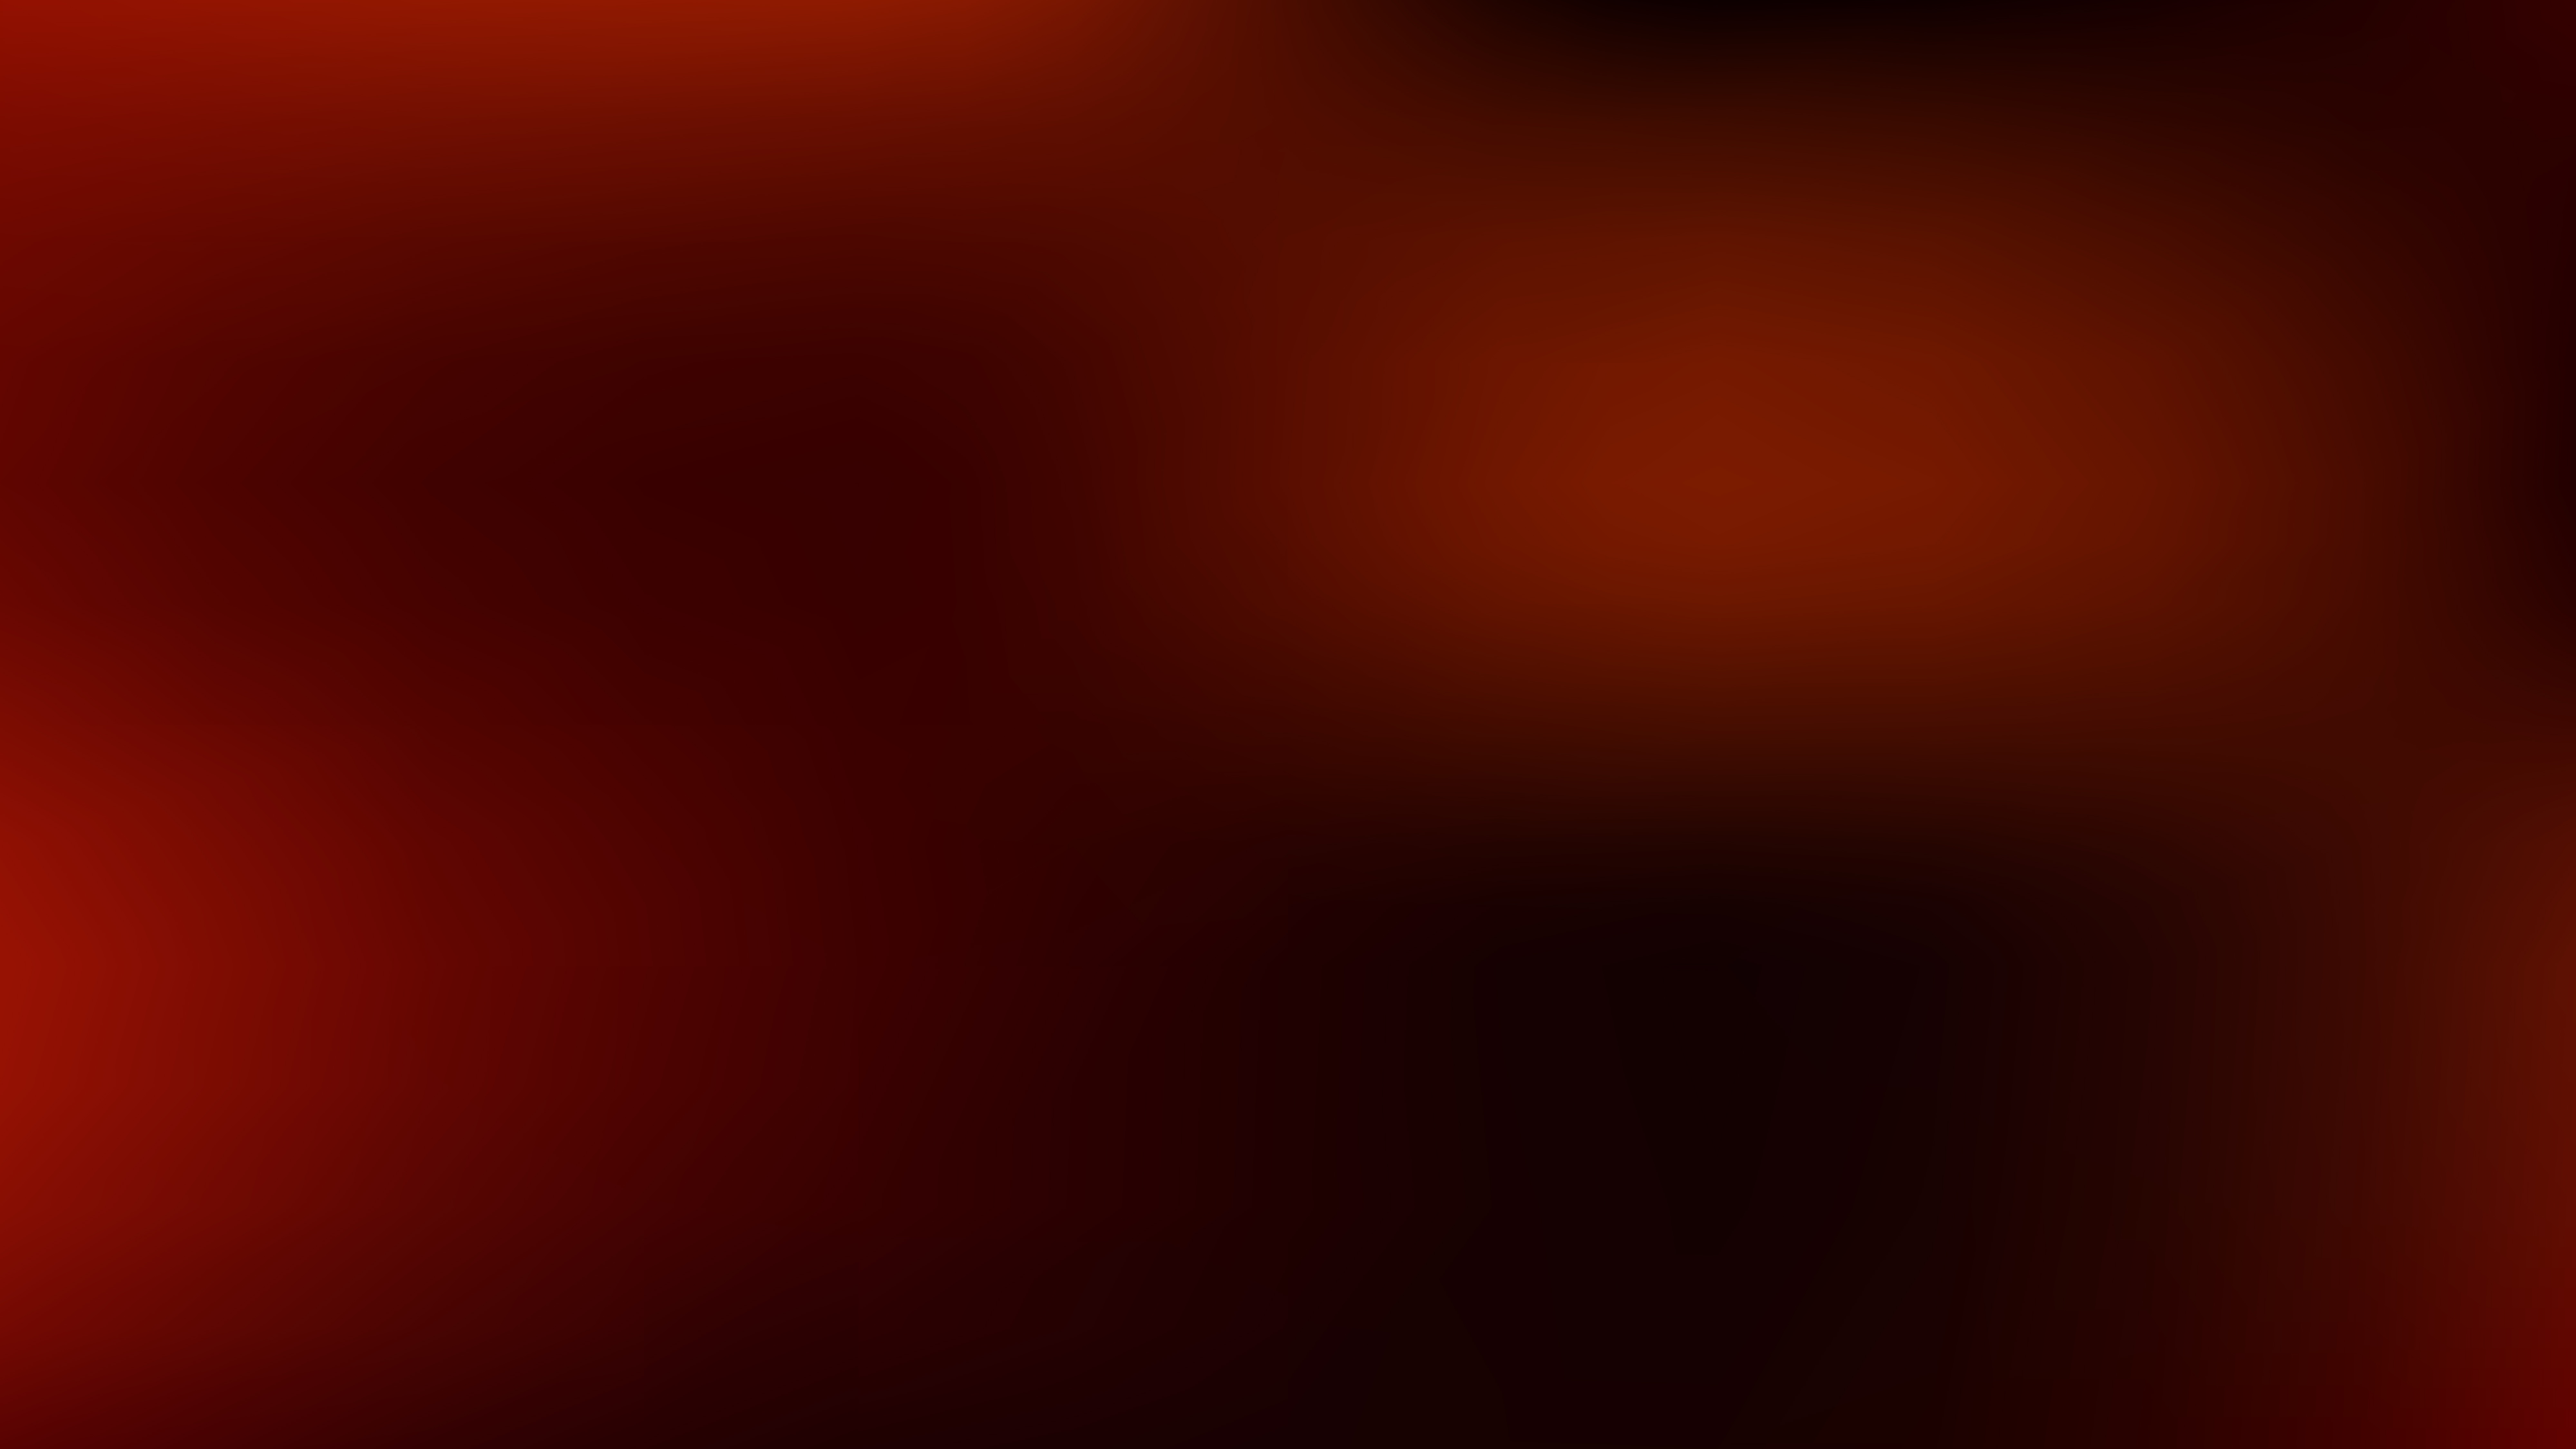 Red And Black Blur Photo Wallpaper Design - Red And Black Blur Background -  8000x4500 Wallpaper 